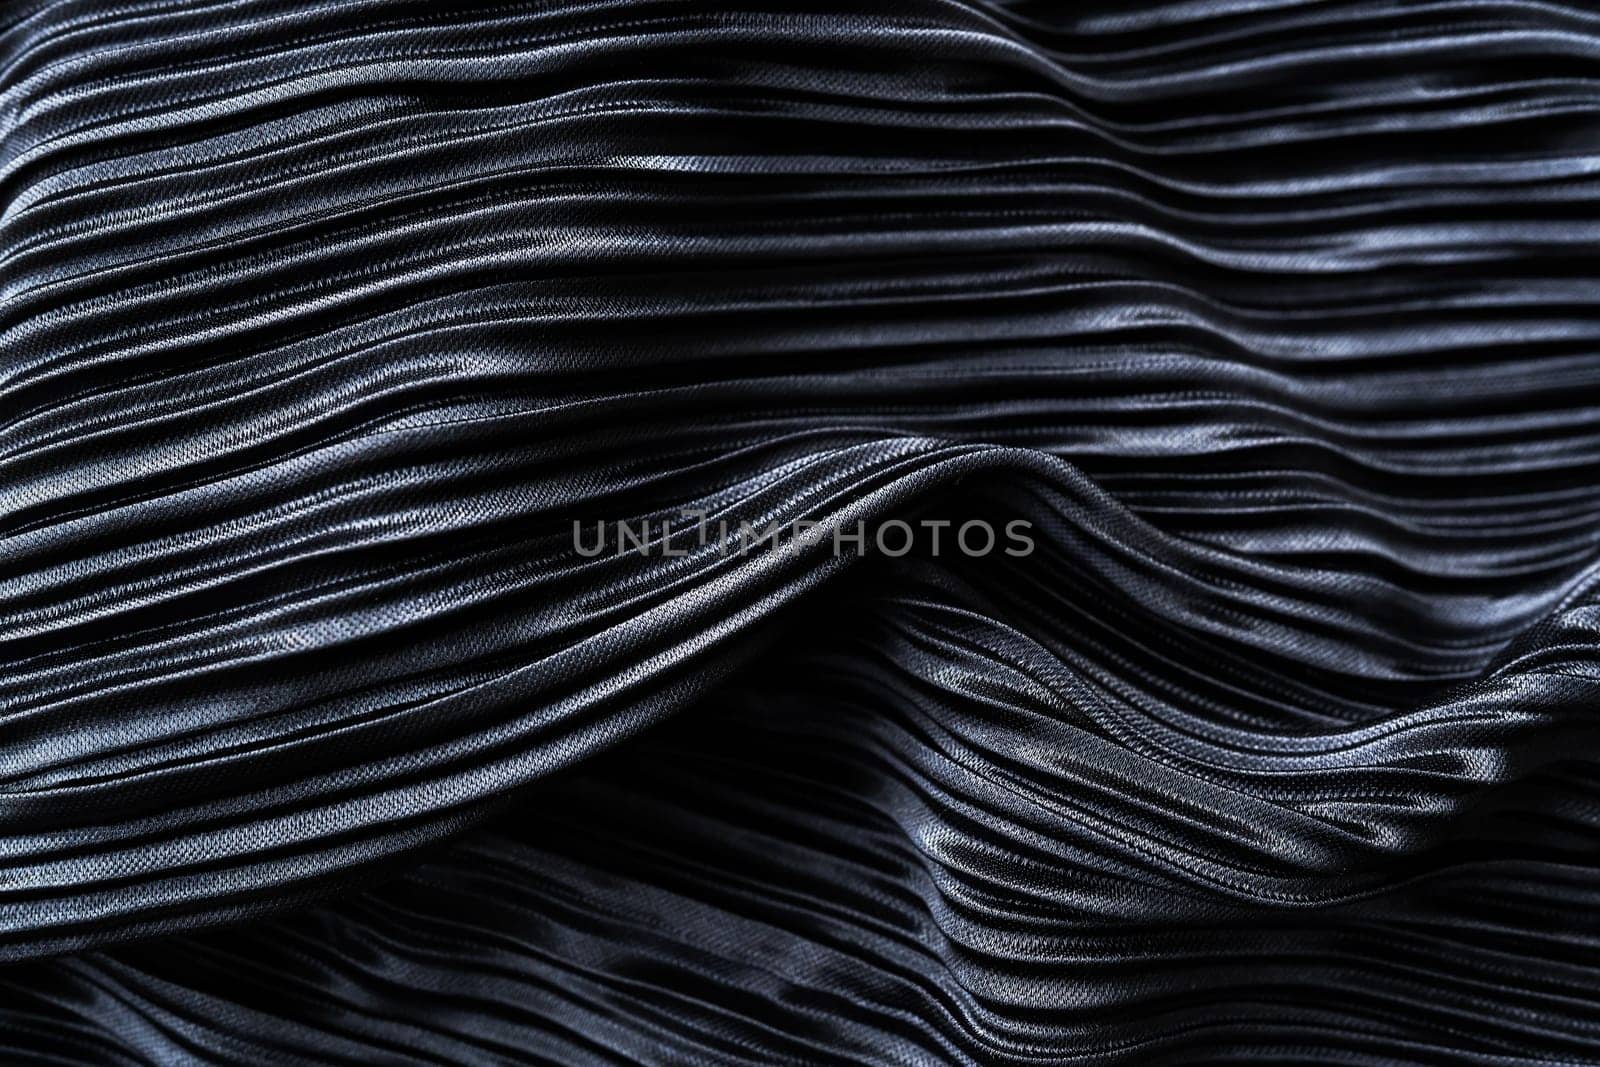 A close-up view of a dark-colored fabric with intricate wavy patterns. The fabric has a glossy finish that reflects light and emphasizes the richness of its color and texture